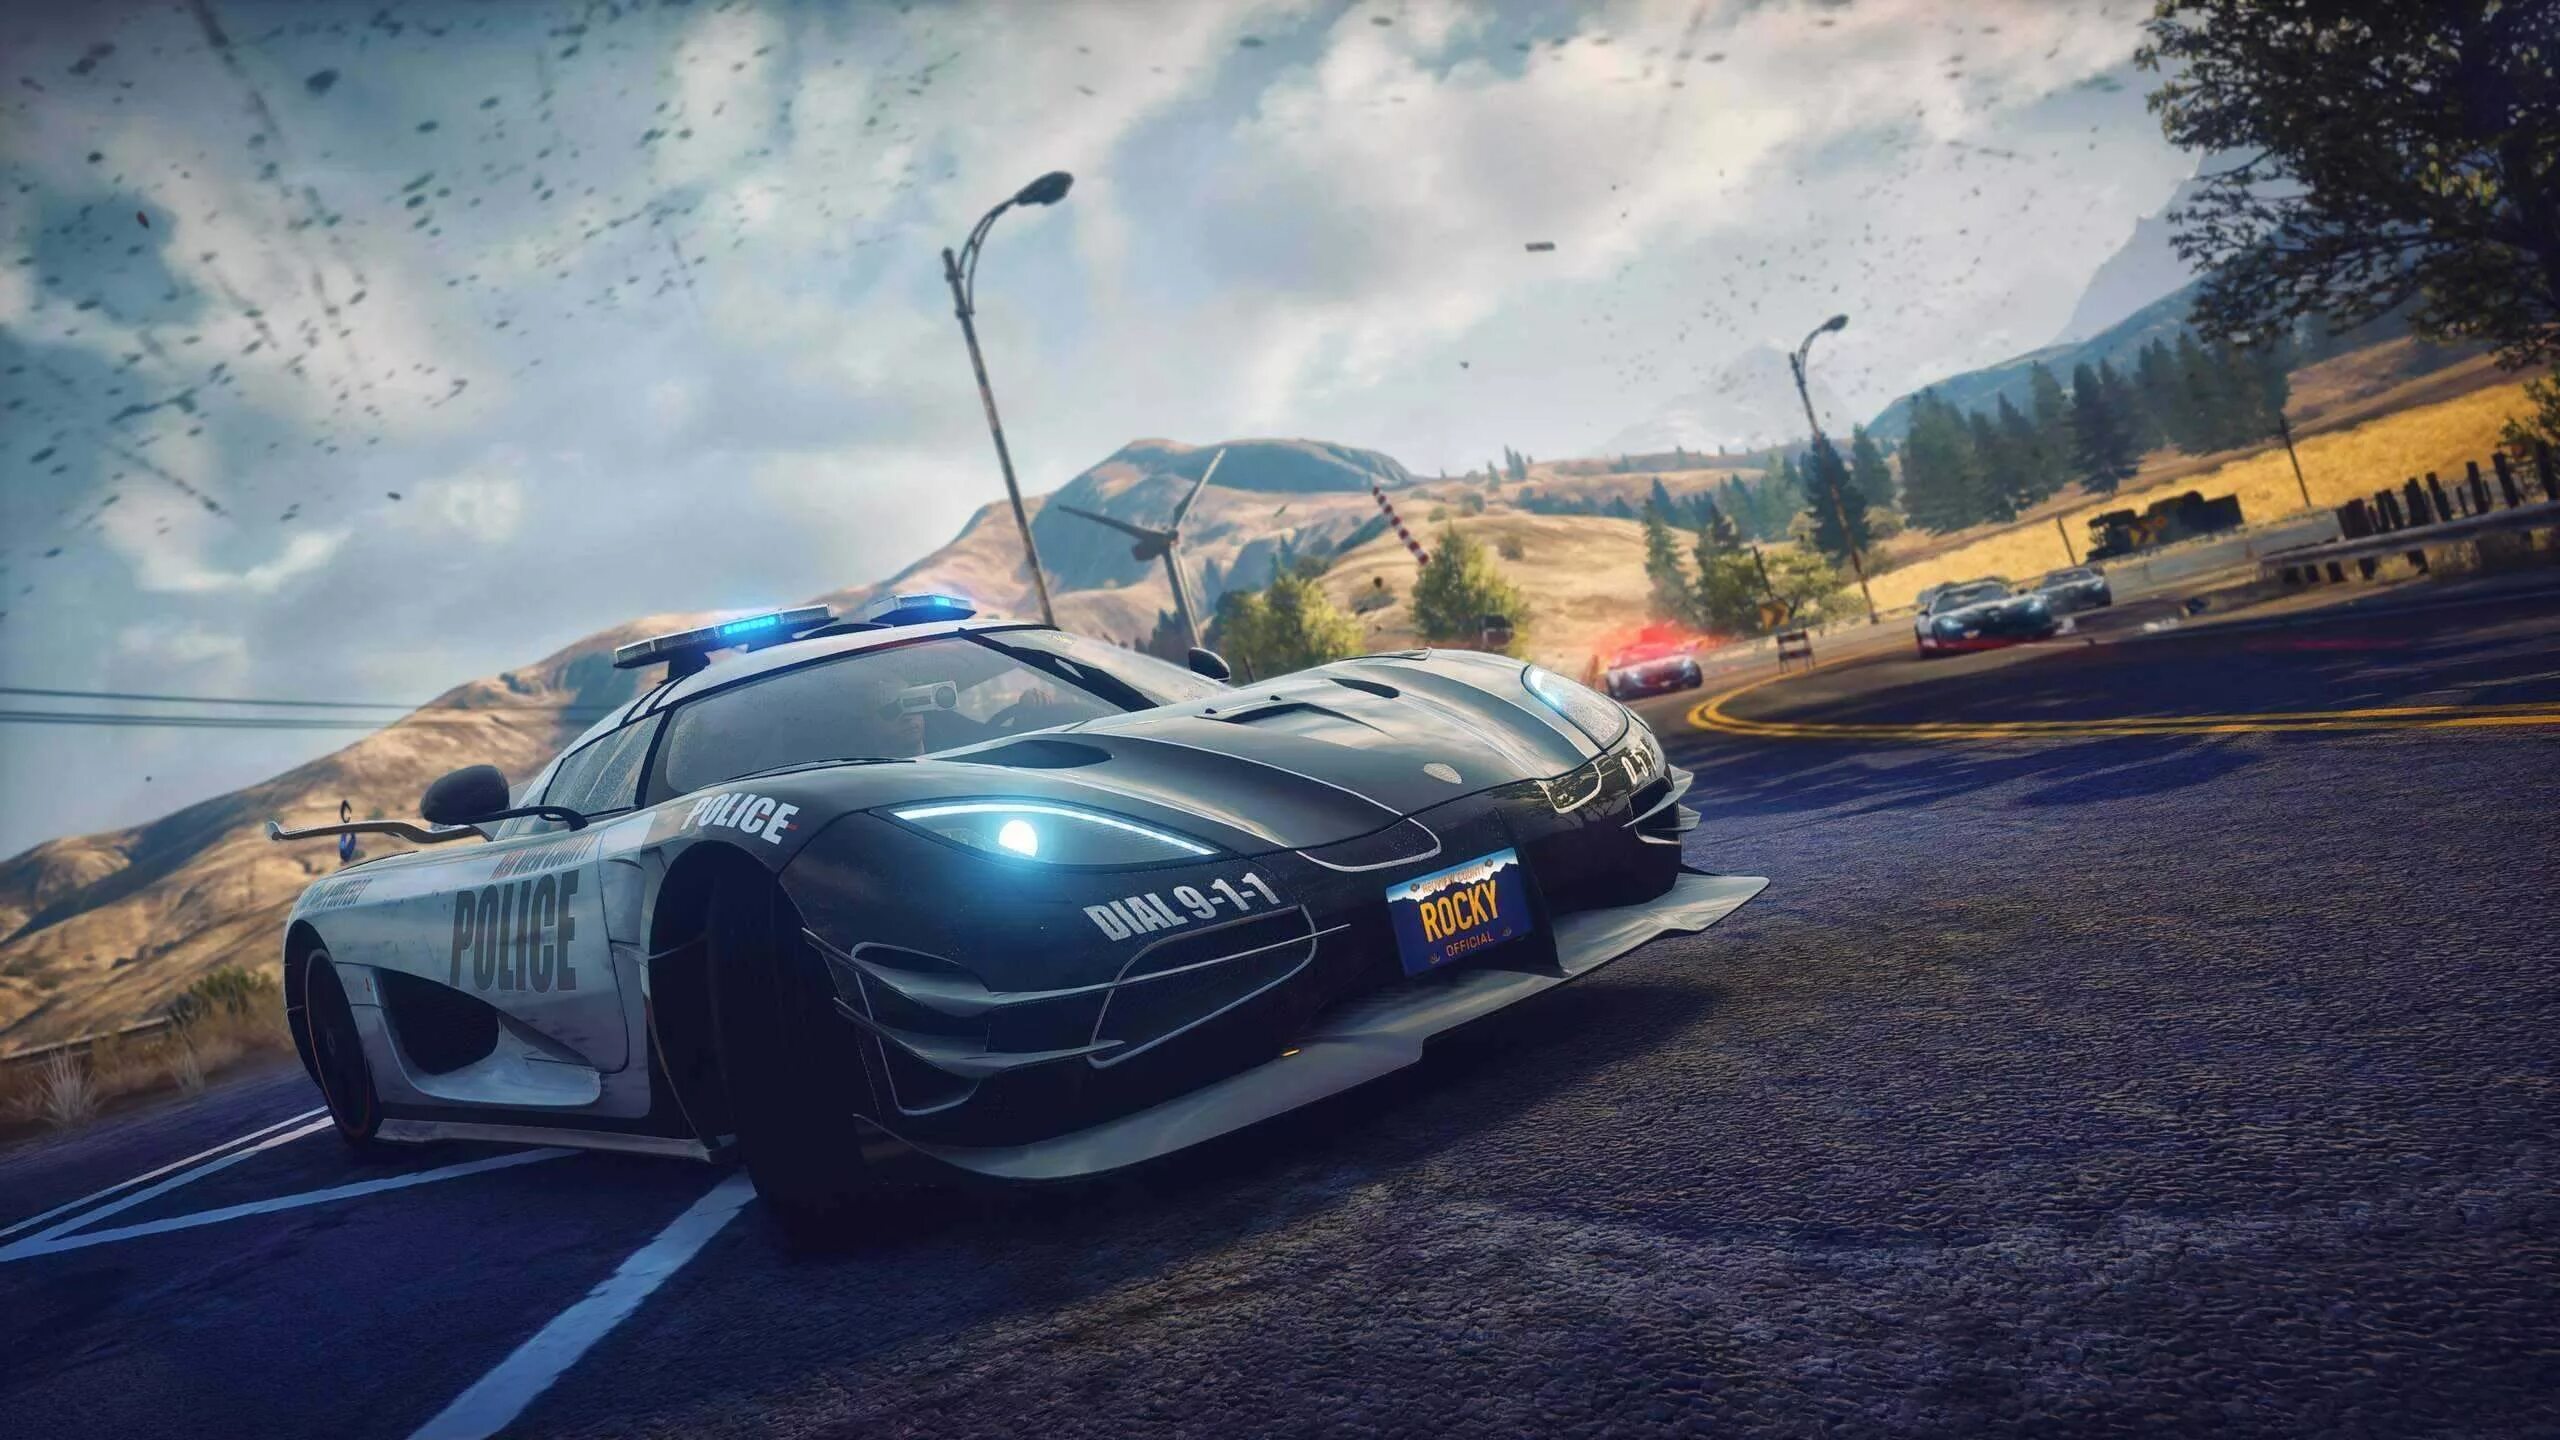 Need for Speed Rivals. Need for Speed ривалс. Rivals, NFS 2015. Игры машины нфс